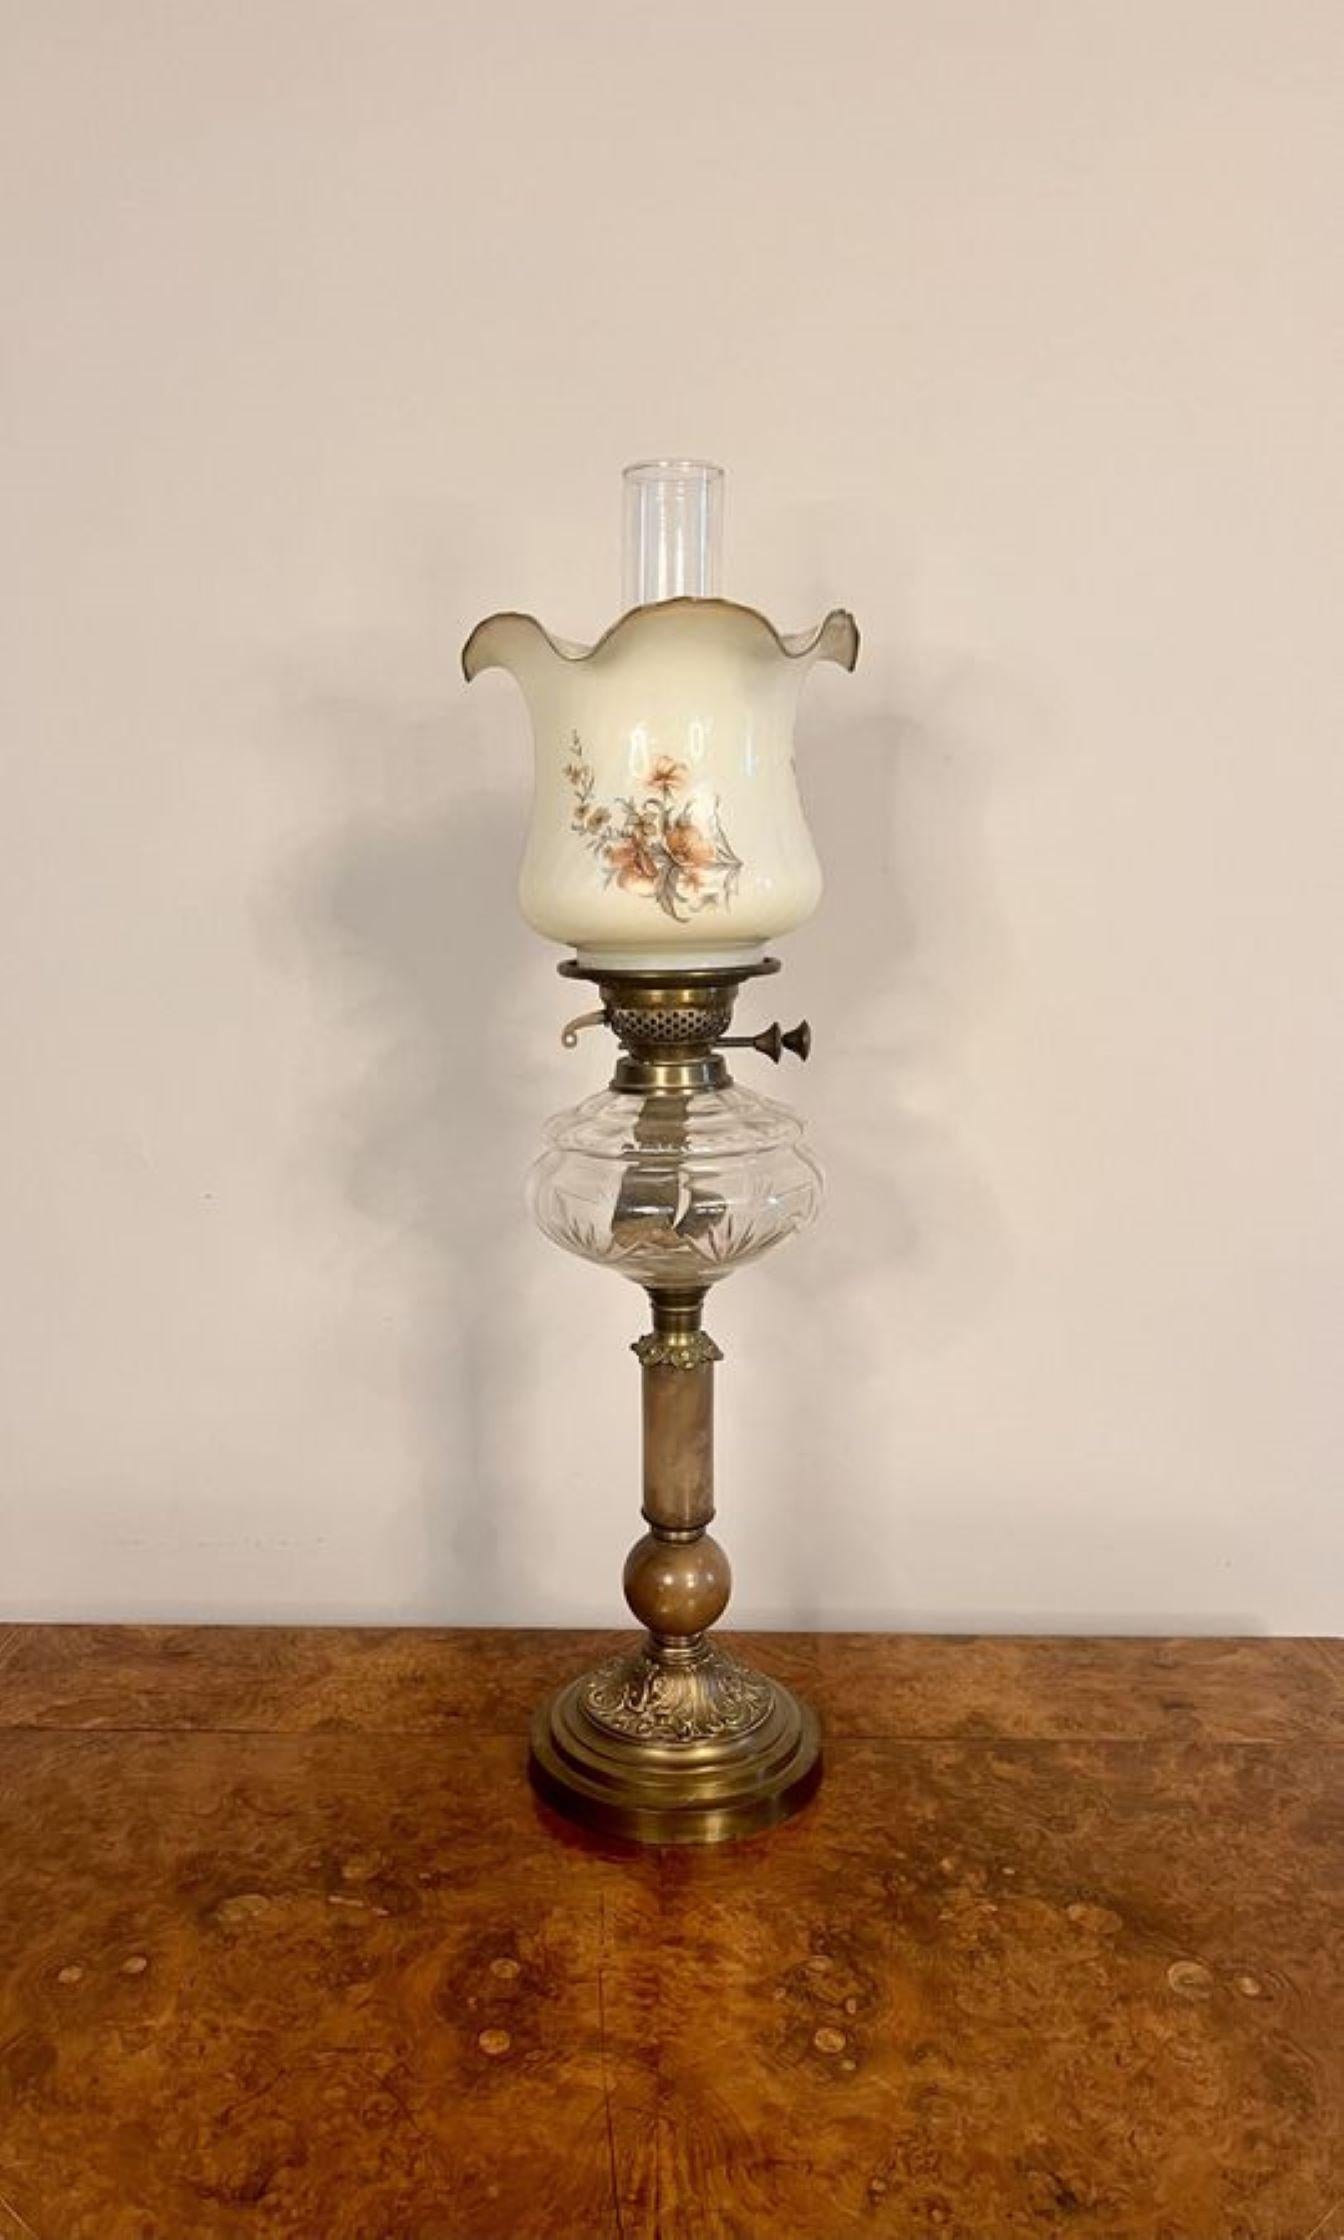 Stunning quality antique Victorian oil lamp, having an original glass chimney and a floral wavy shaped top shade, original brass burner, clear glass reservoir supported on a onyx corinthian column with brass capitals standing on a ornate brass